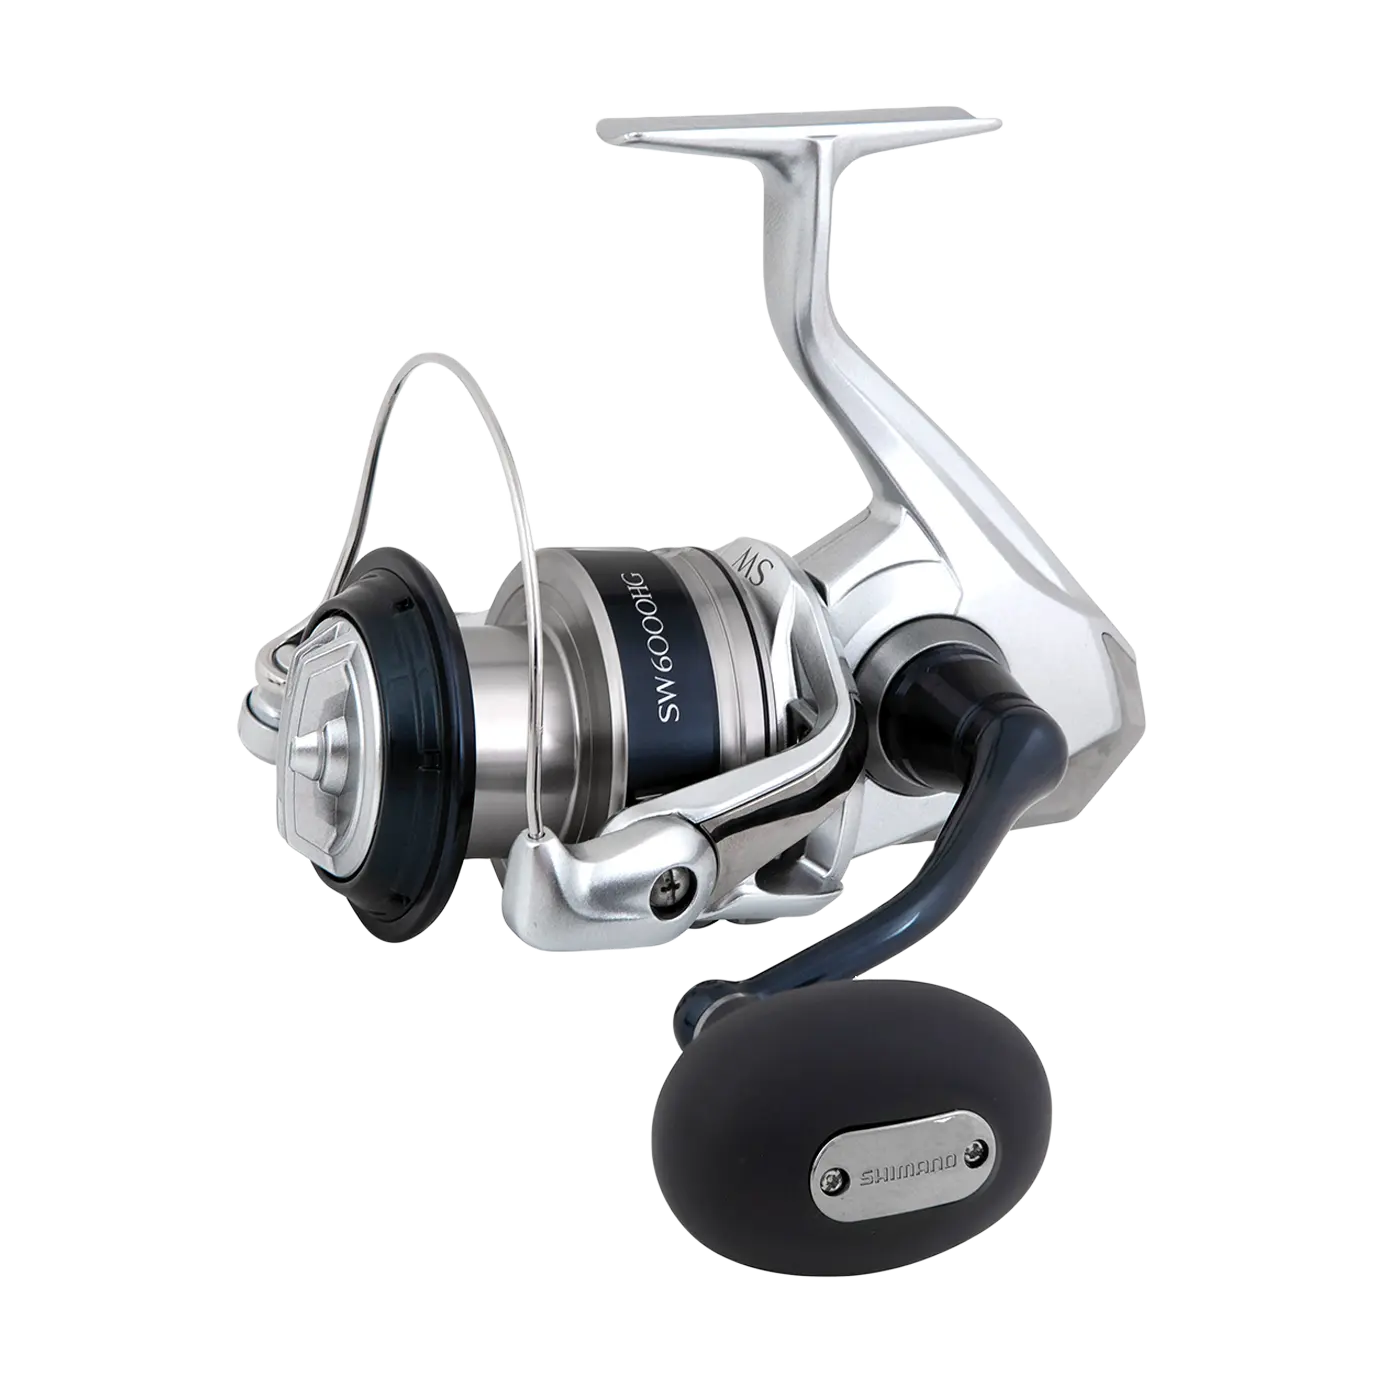 NEW SHIMANO 20 SARAGOSA SWA 20000 PG REEL SRG20000SWAPG *1-3 DAYS FAST  DELIVERY*